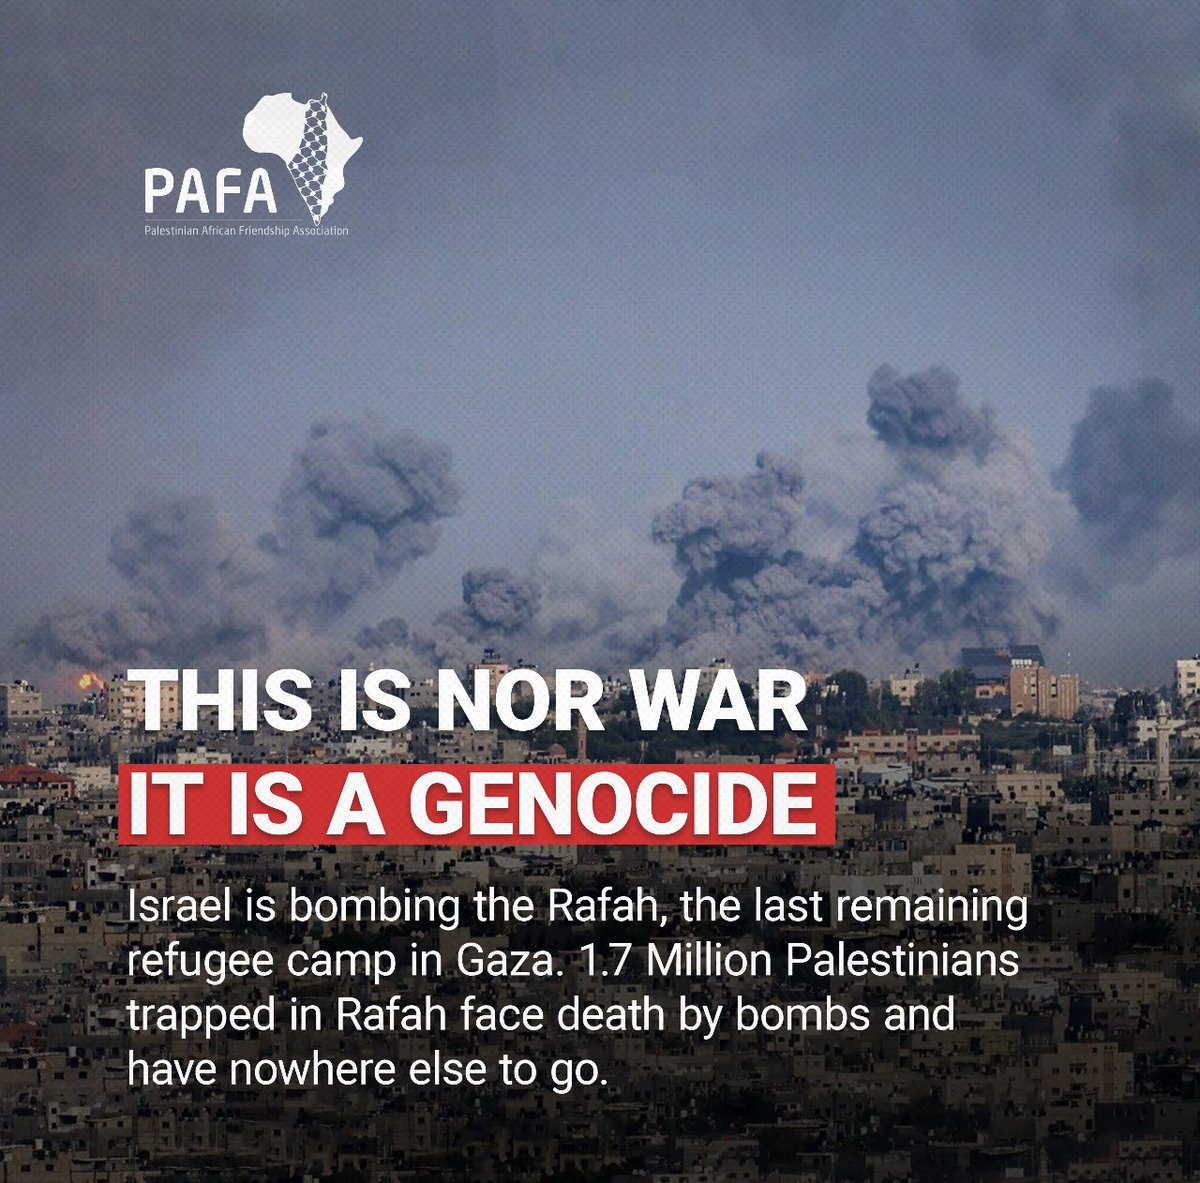 Israel is dropping bombs on refugee civilians in Rafah, Gaza. This is not war, it is a Genocide! #RafahGenocide